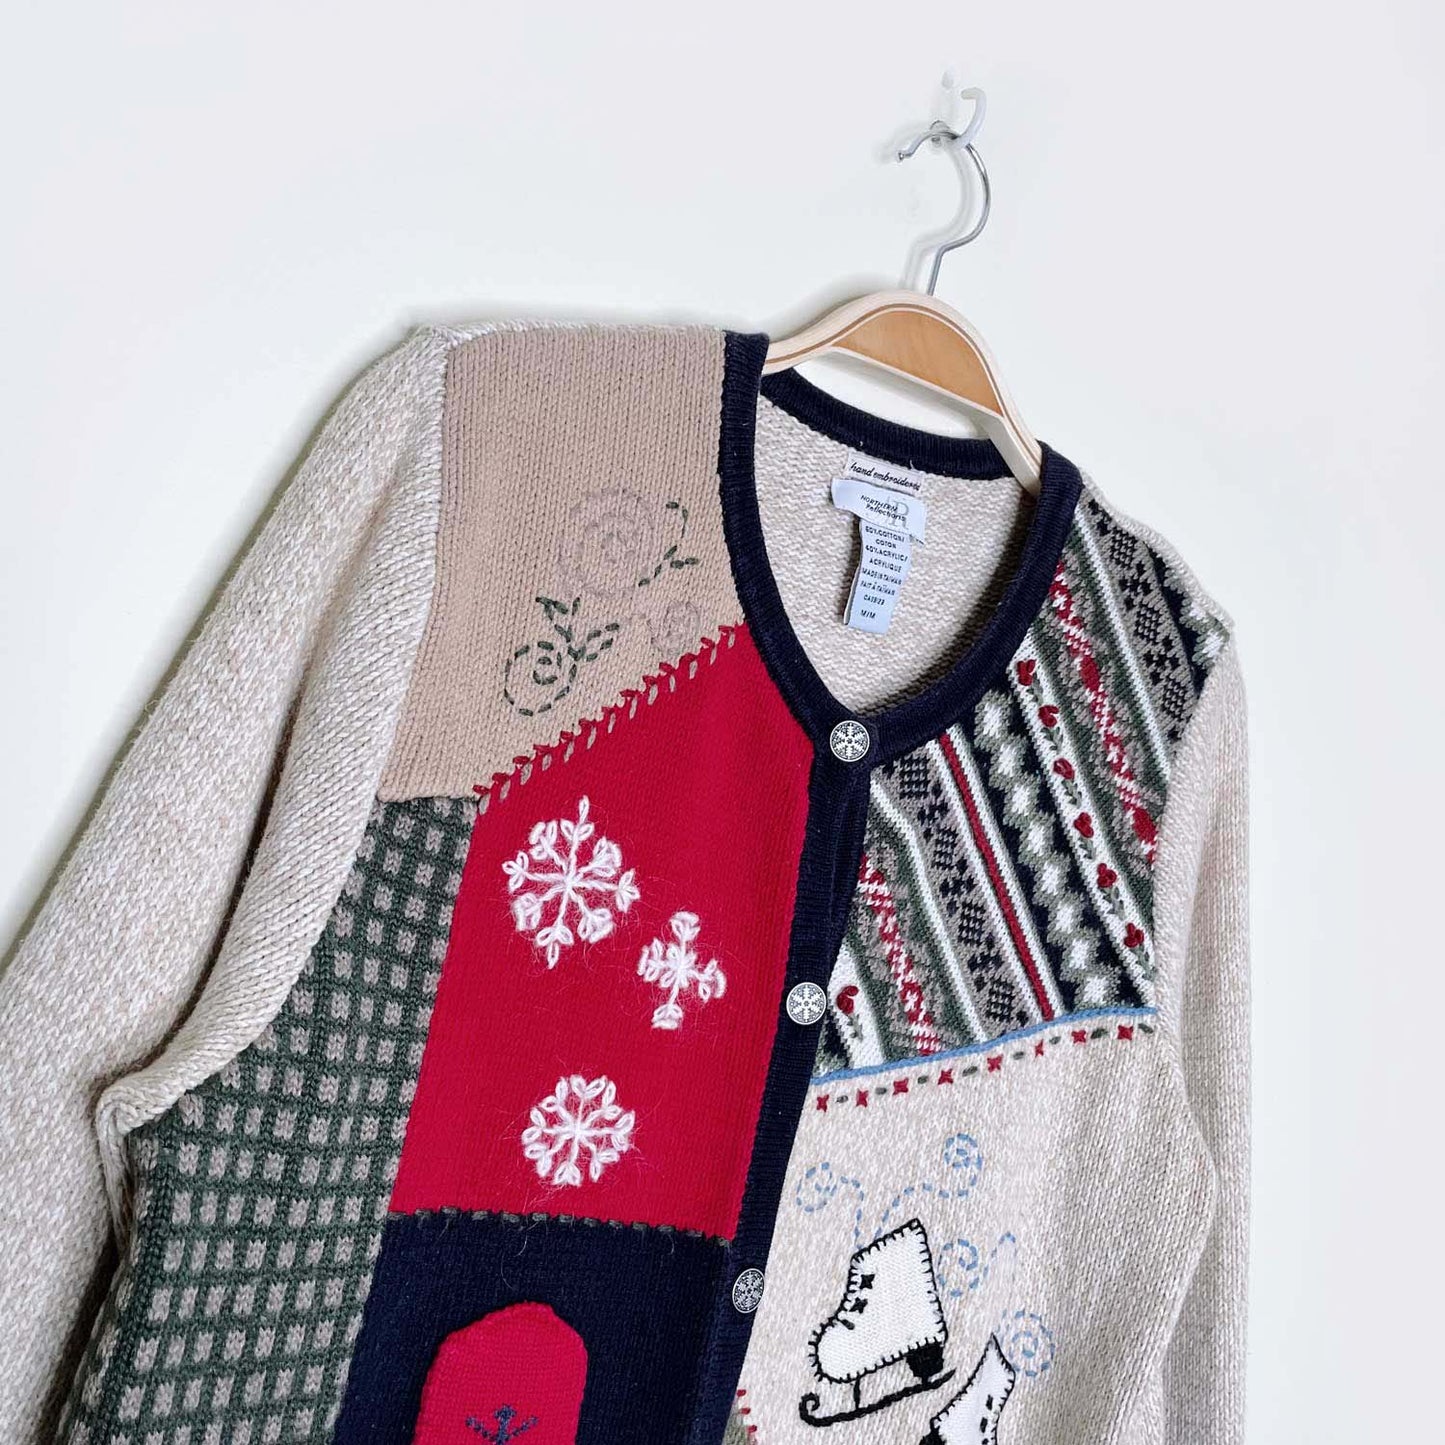 vintage nr hand embroidered holiday patchwork knit cardi - size medium